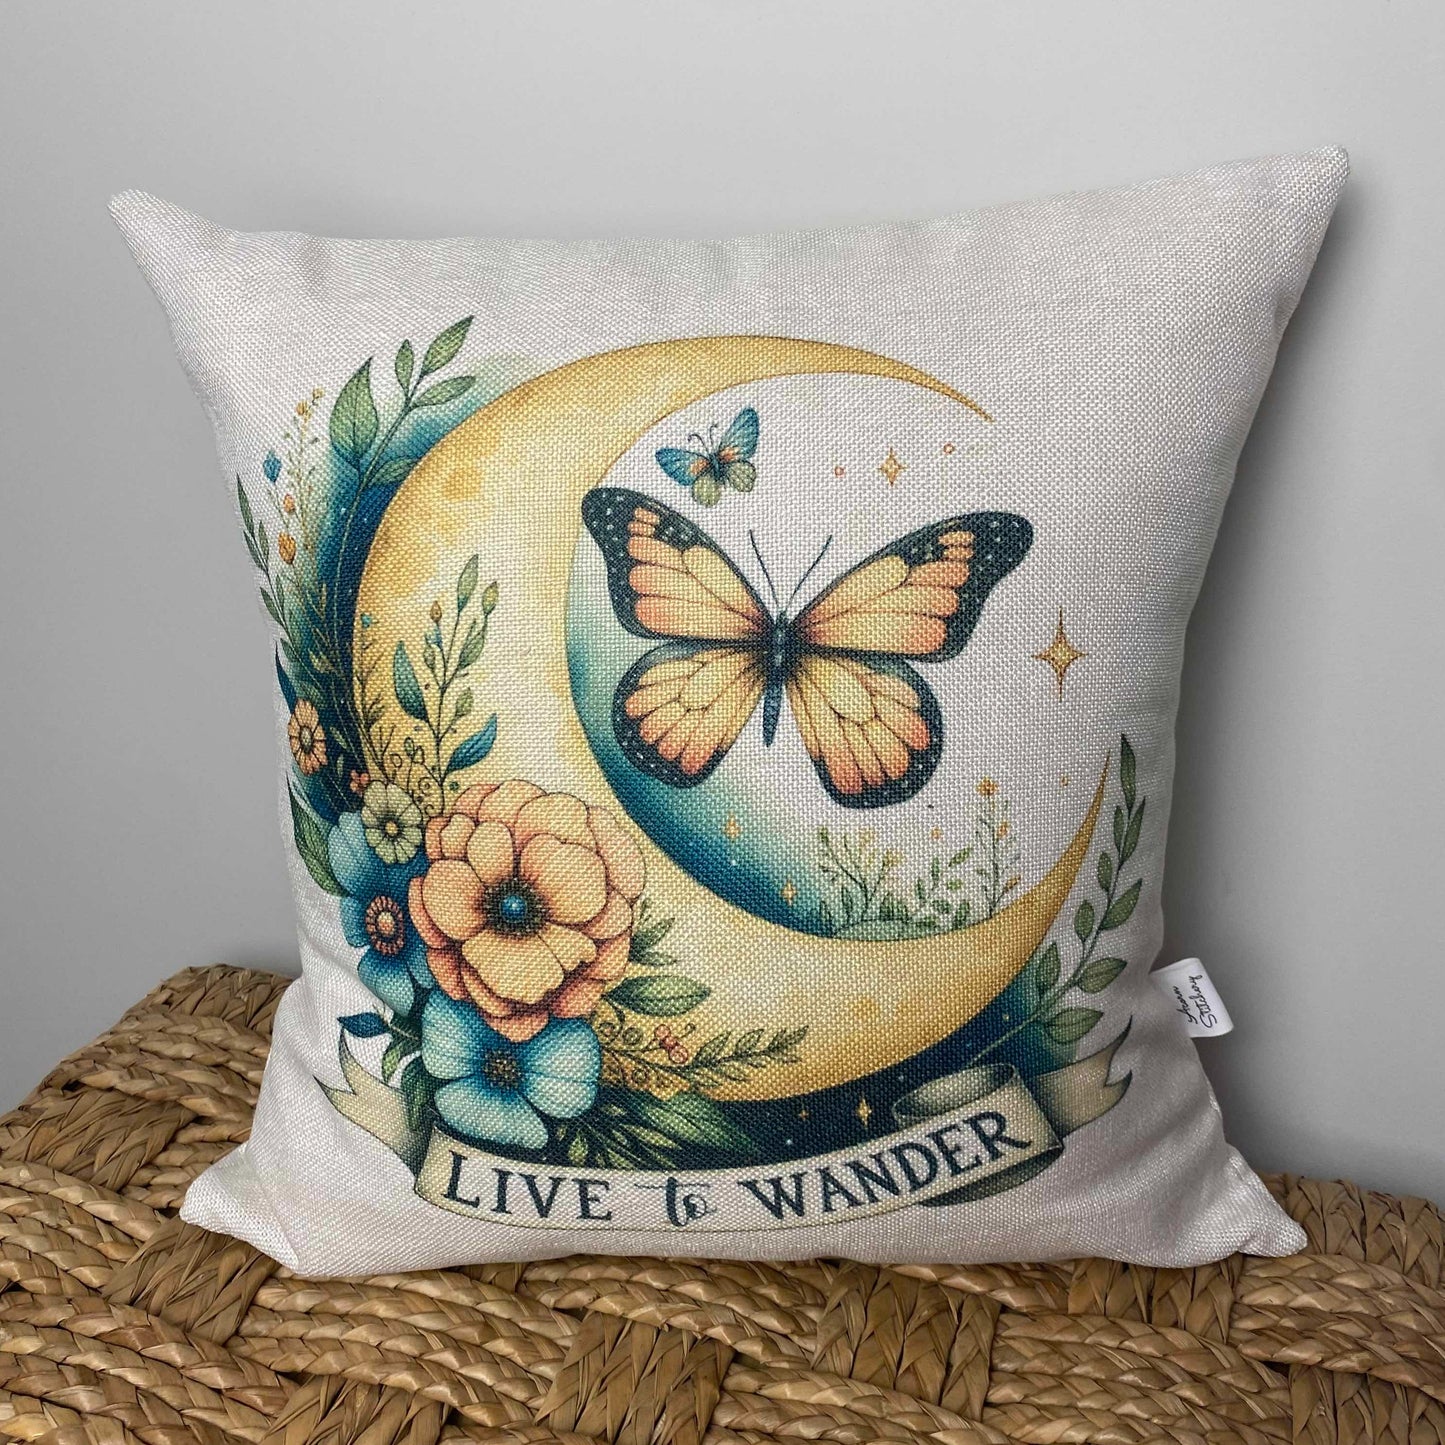 Live To Wander pillow 18" x 18"